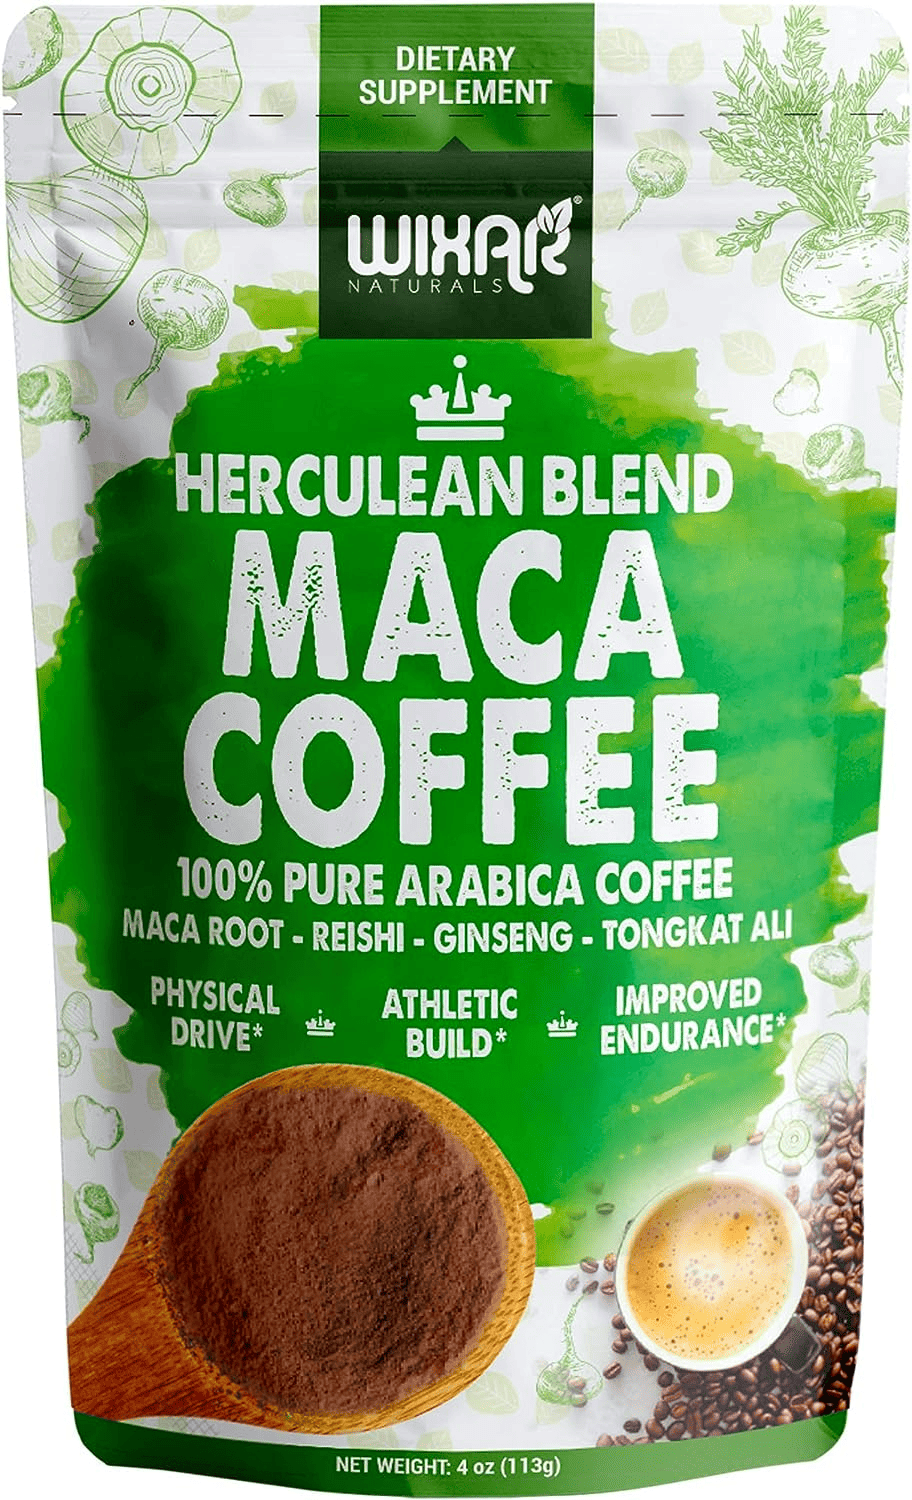 A cup of Maca Coffee with maca root powder, cacao powder and coffee beans